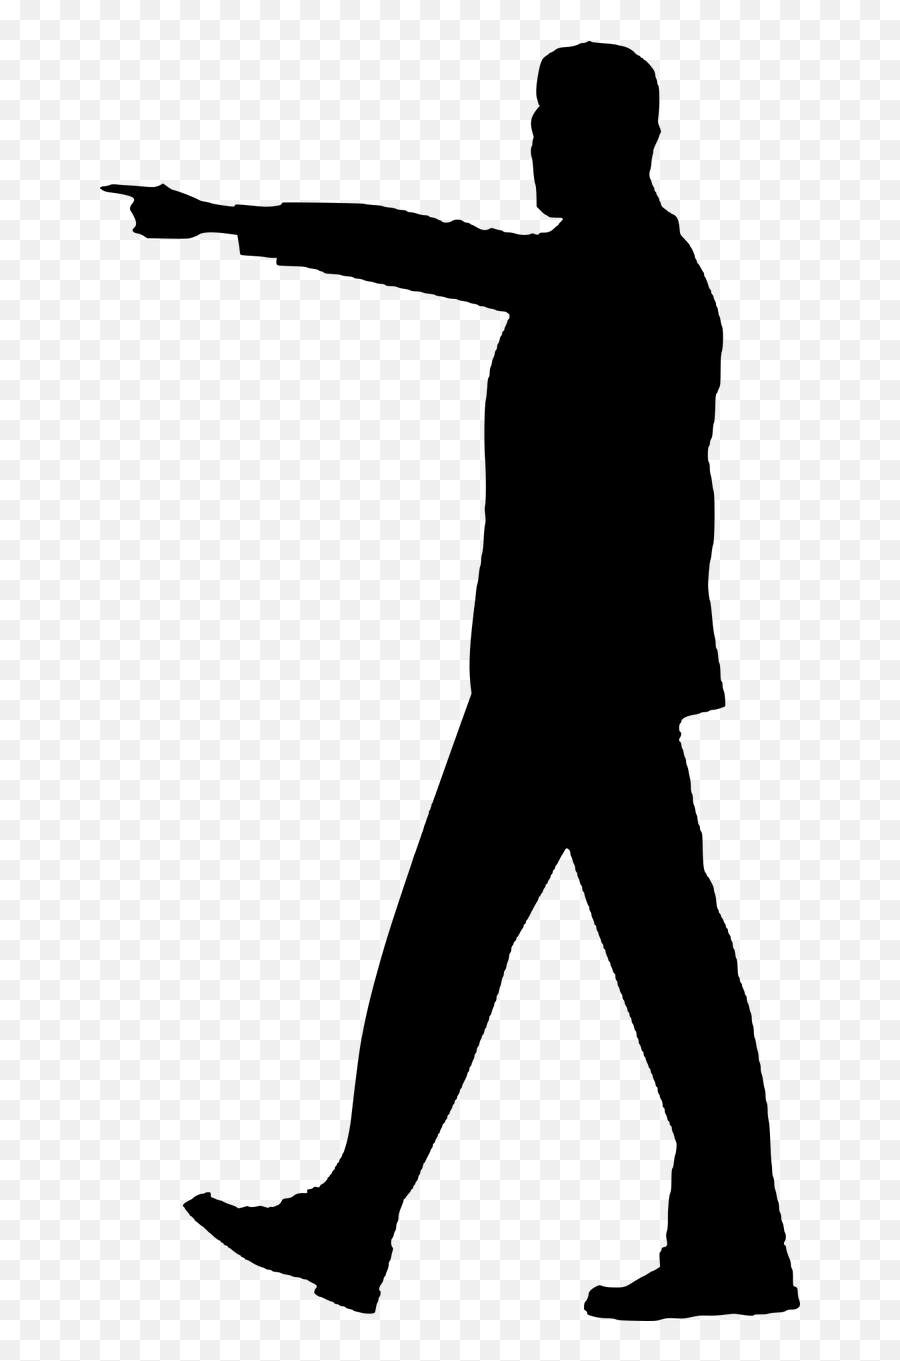 Silhouette Businessman Move Arms Outstretched Arms Raised - Arm ...